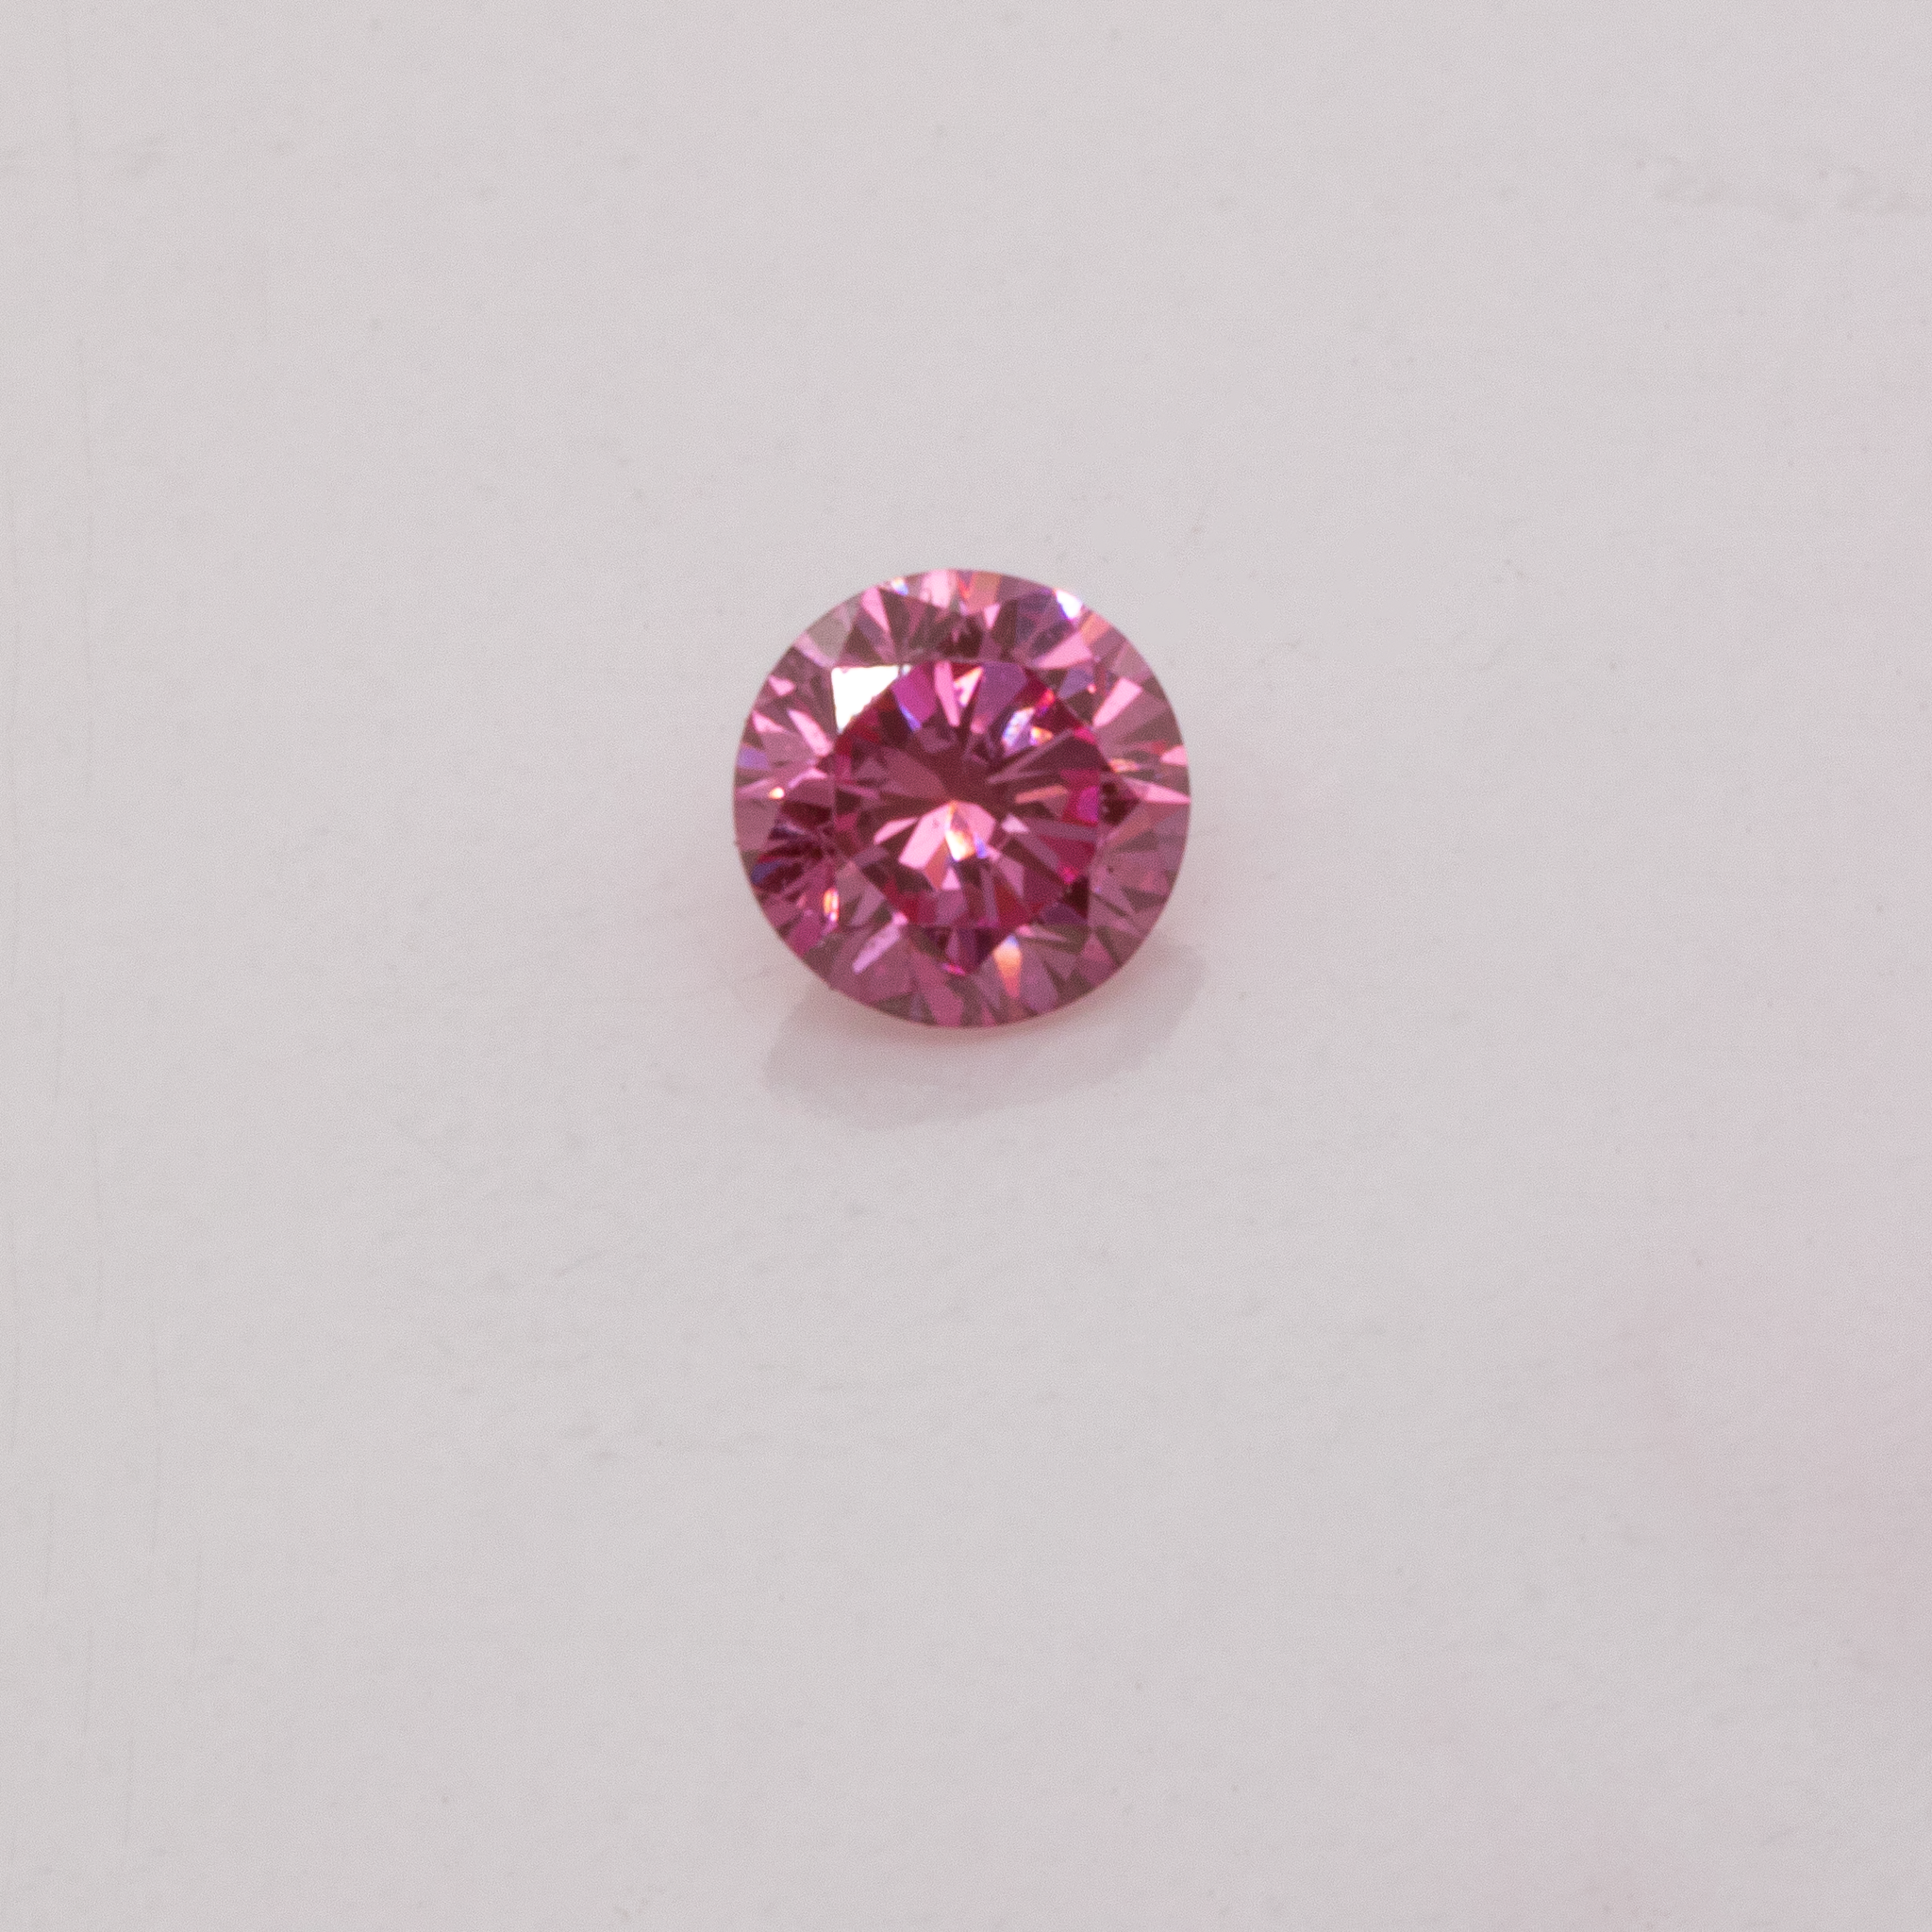 Diamond - pink, VS, round, 2.0mm, approx. 0.03cts, No. D11064